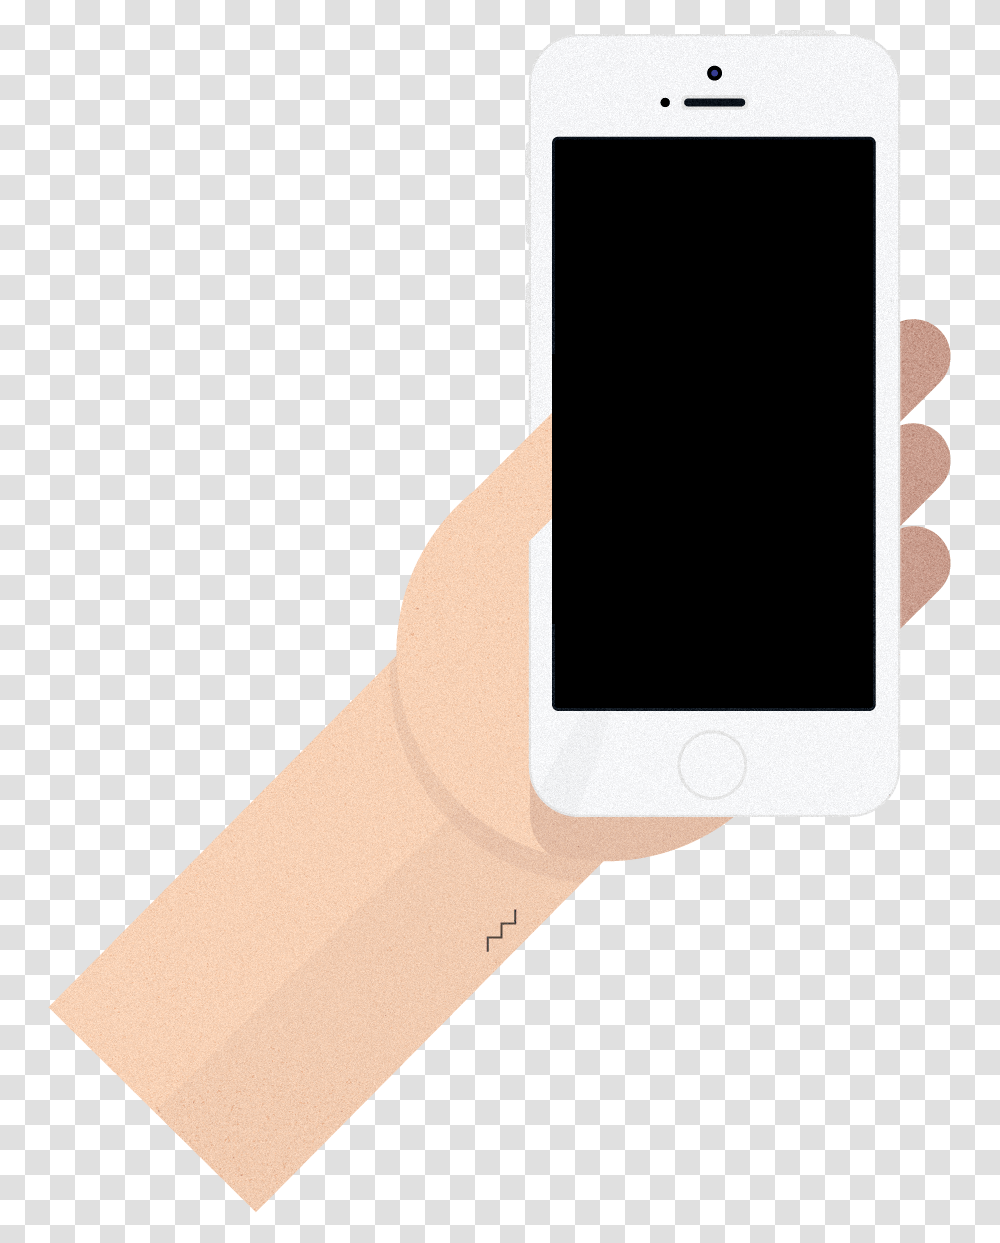 Phone Hand Flat Design Smartphone, Electronics, Mobile Phone, Cell Phone, Iphone Transparent Png